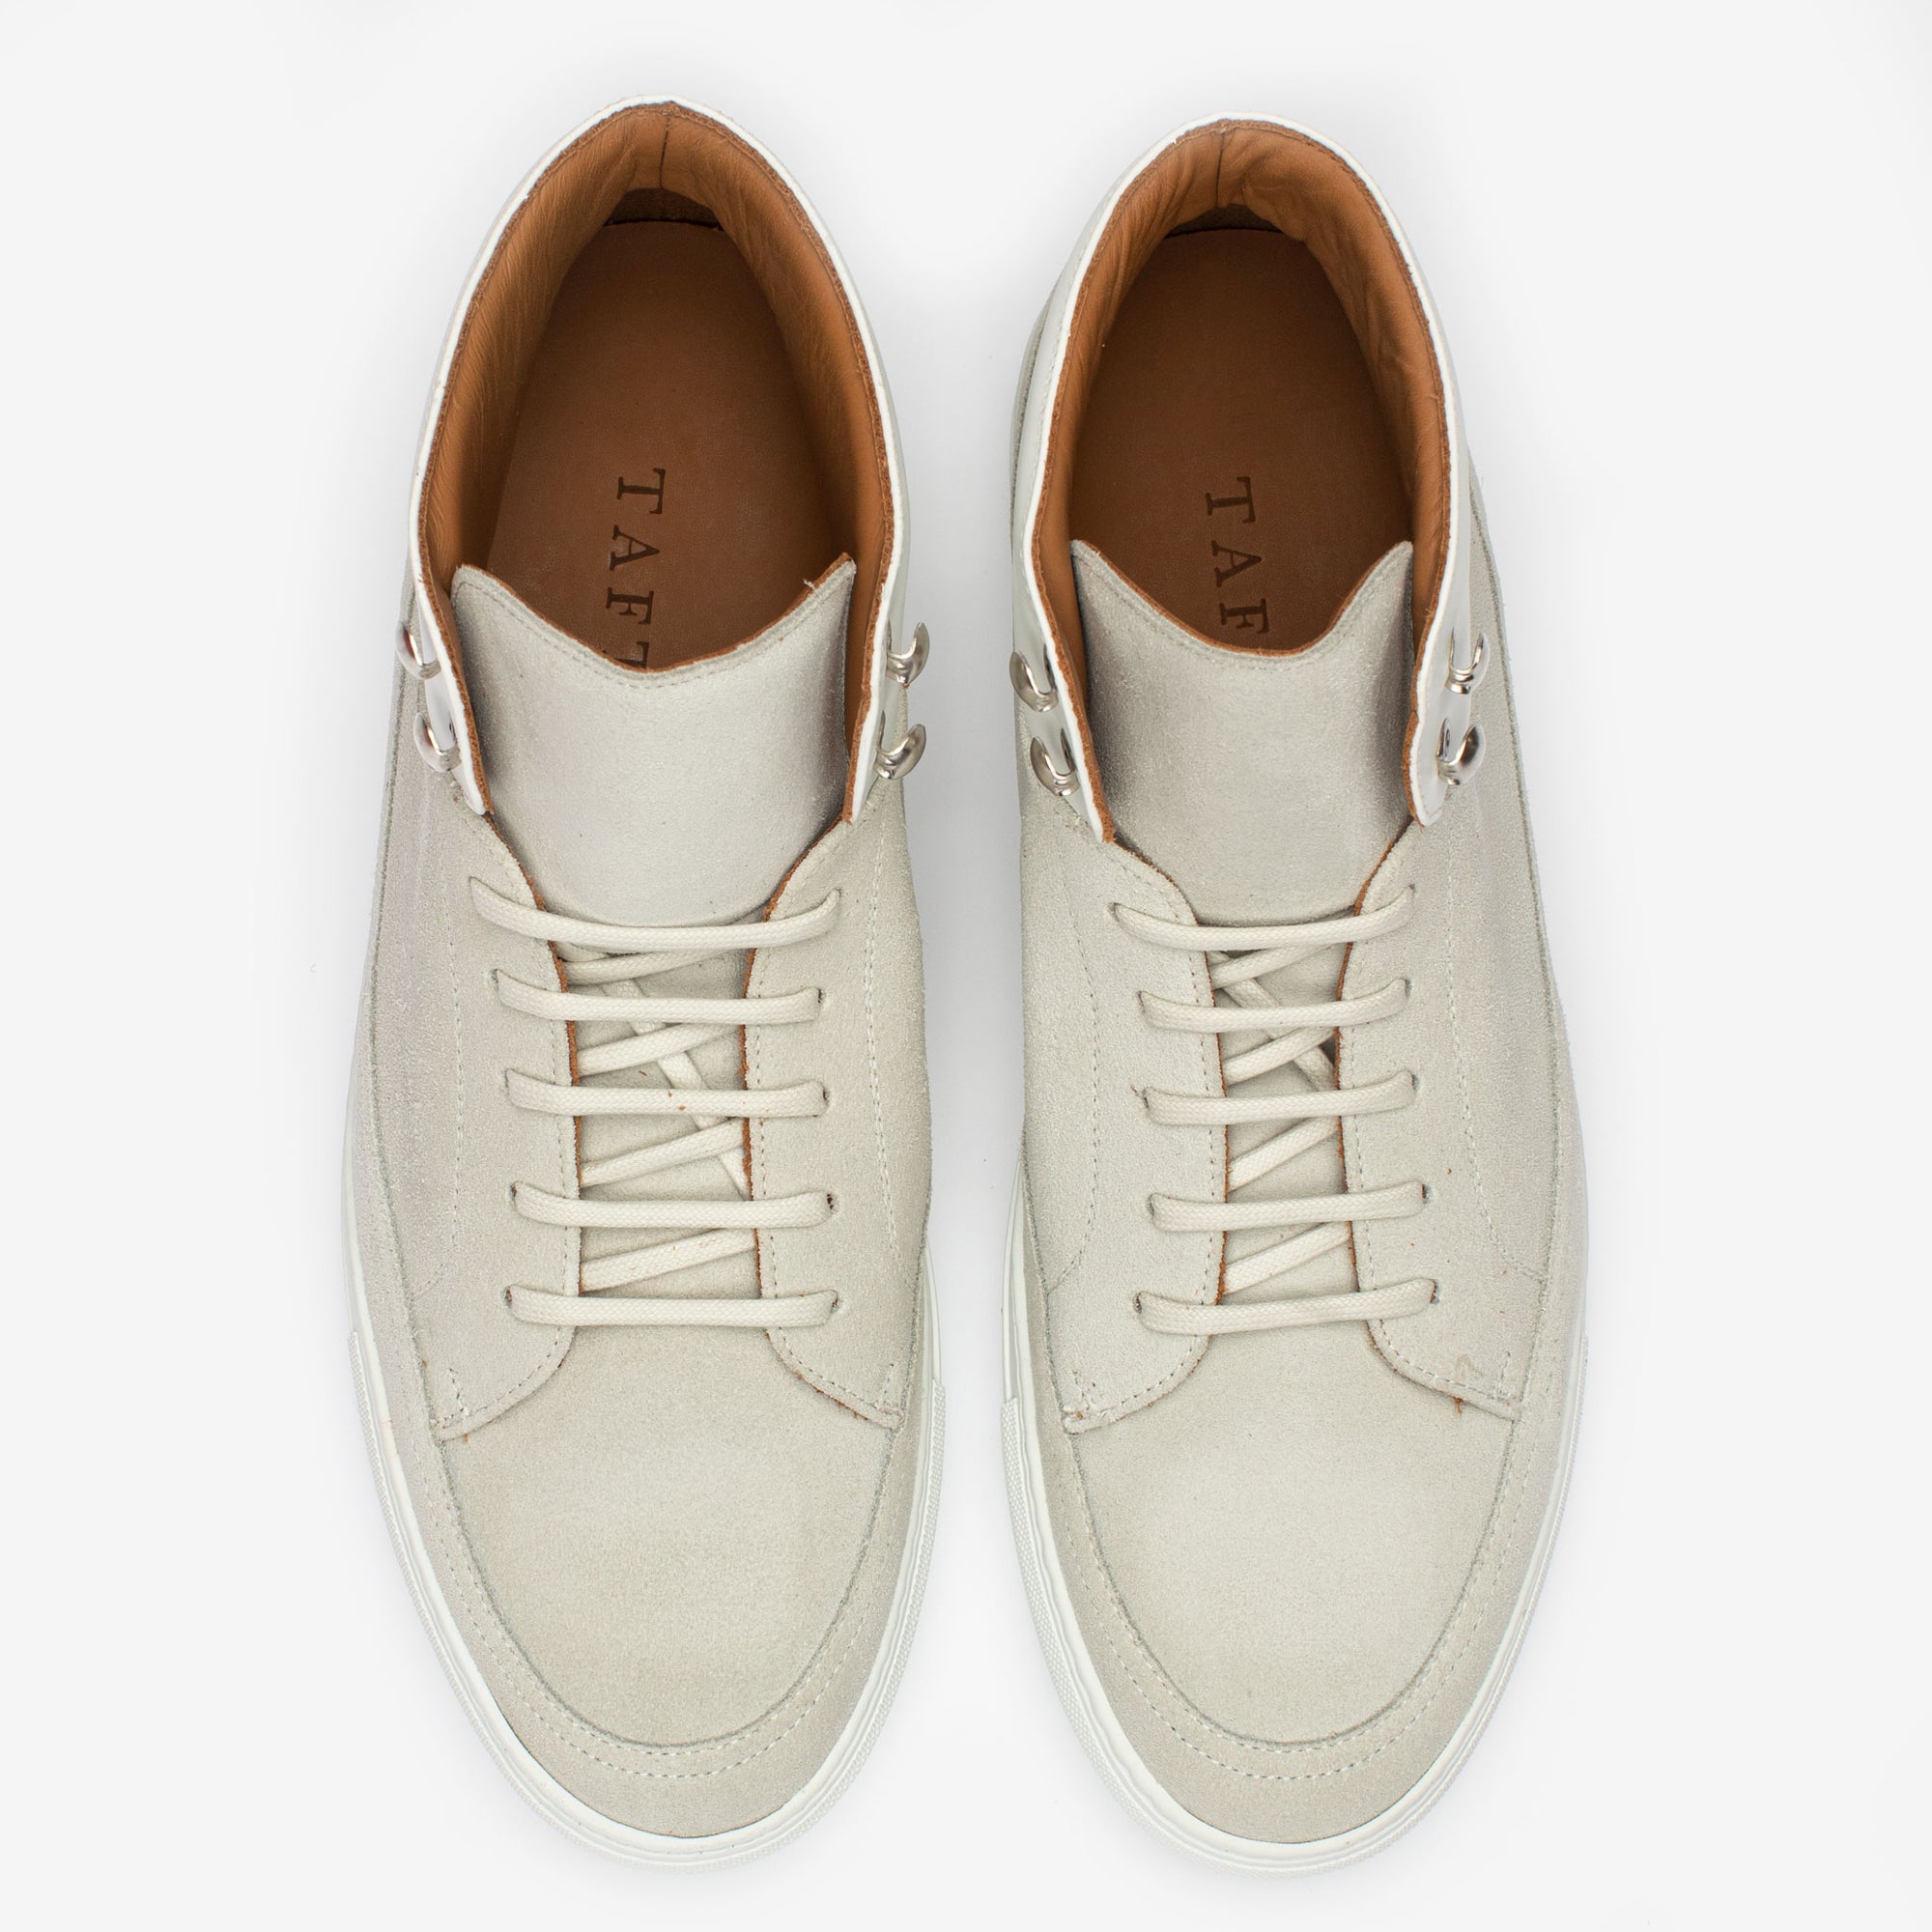 Konsulat Sult min The Fifth Ave Hightop Suede Sneaker in Cream | TAFT